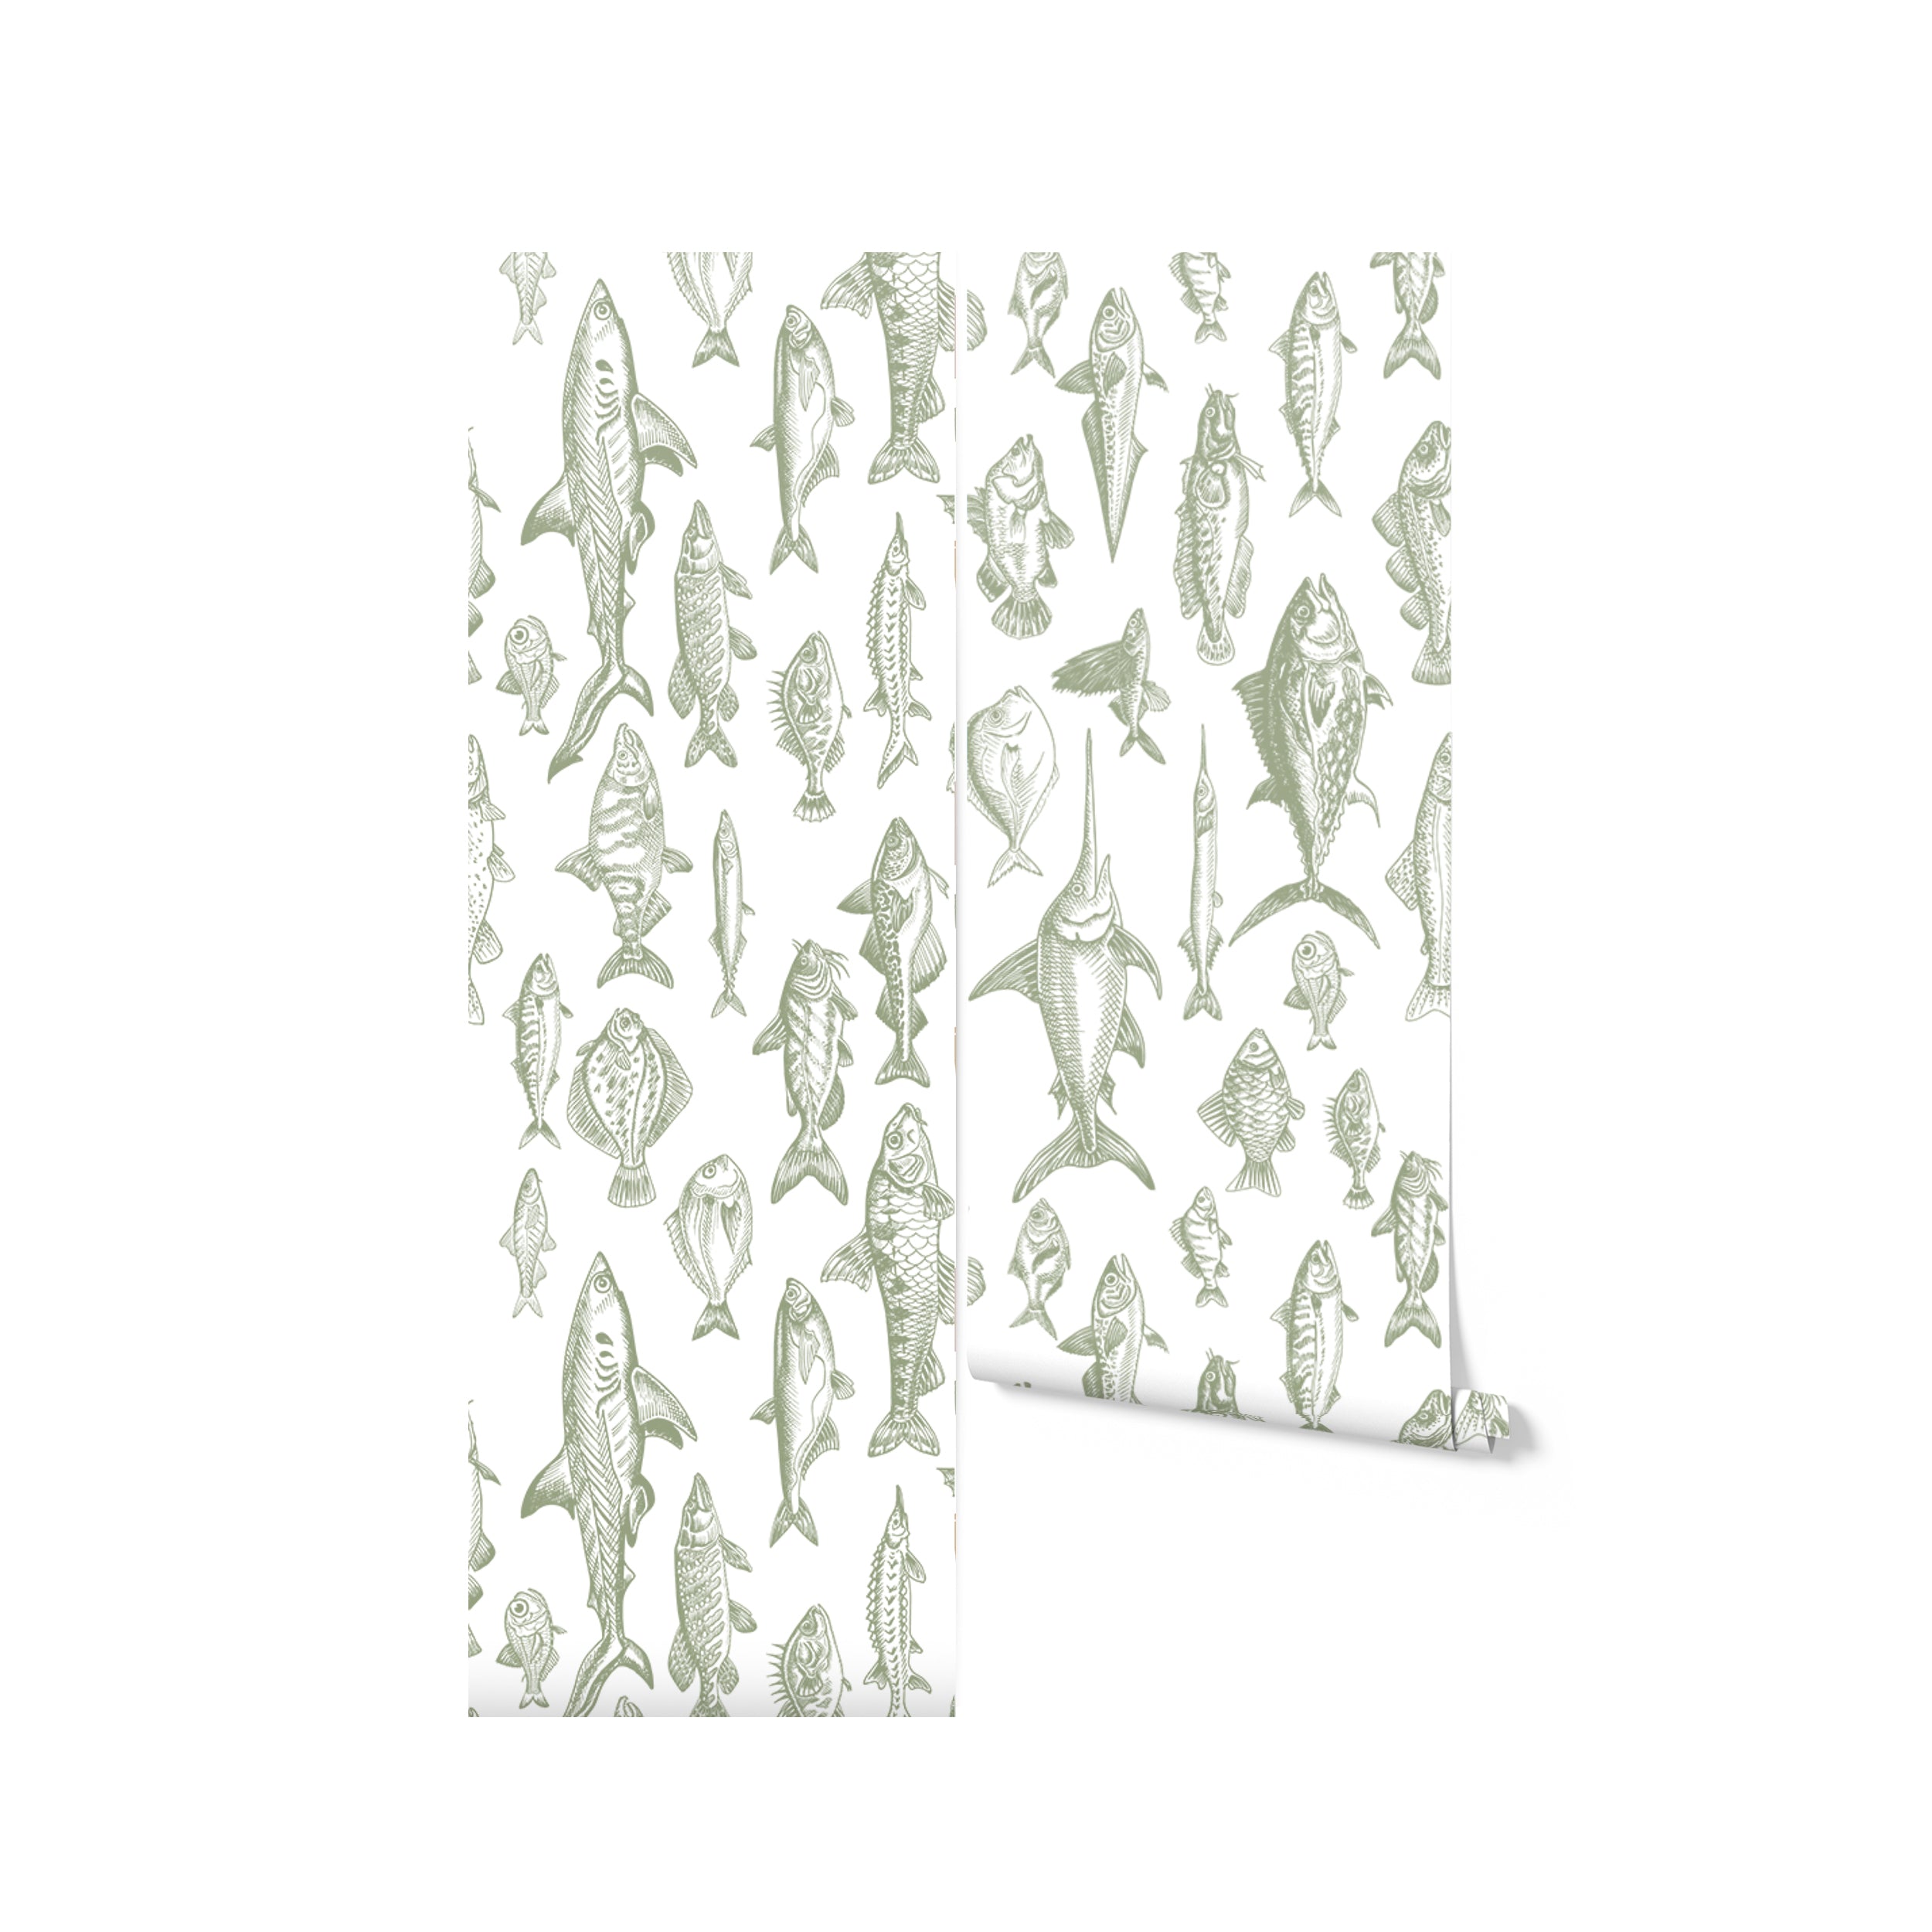 A wallpaper sample with a moss green tint, showcasing an array of fish illustrations offering a naturalistic touch to interior décor.